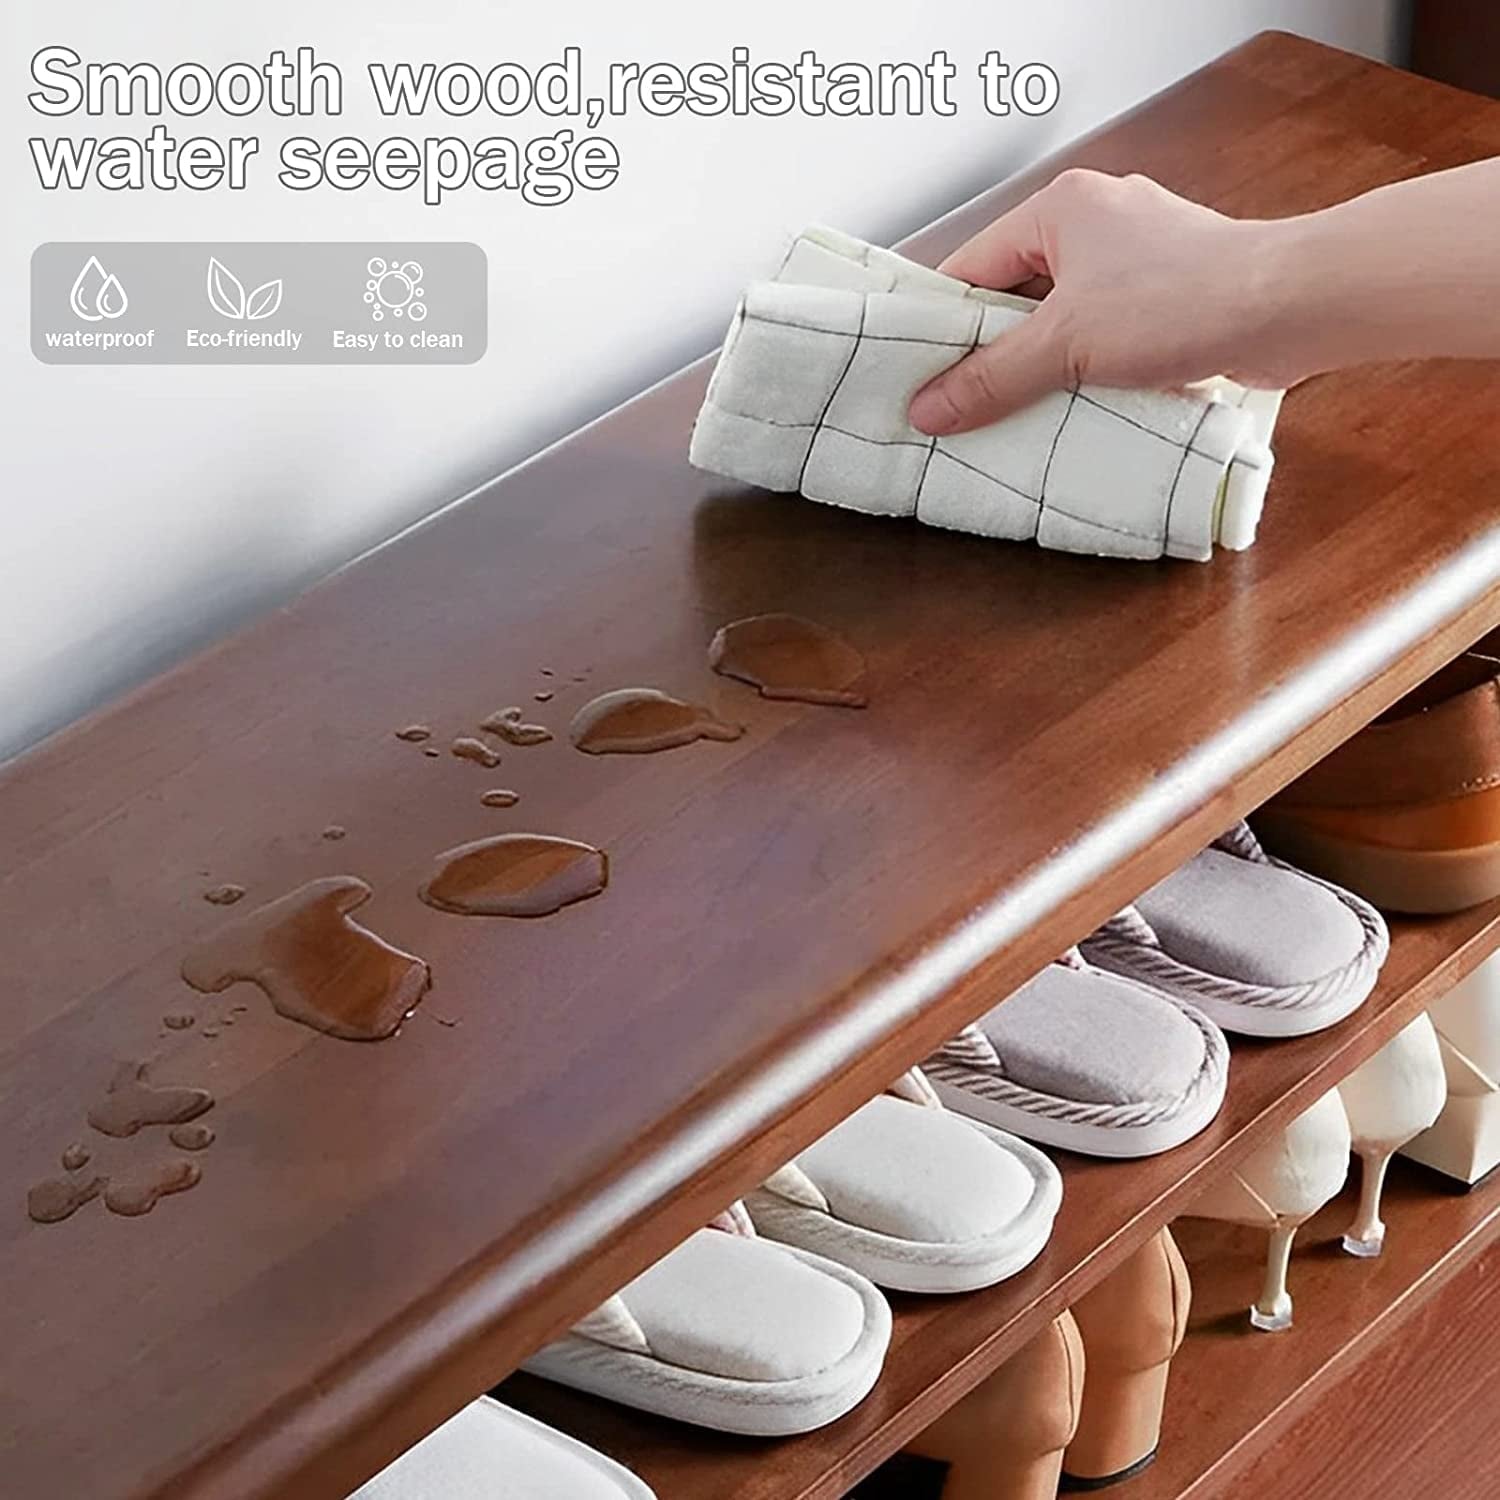 https://ak1.ostkcdn.com/images/products/is/images/direct/a9f1b95260e38f37ce93684bedf075ec7e6a4915/Shoe-Storage-Bench%2C-Adjustable-3-Layers-Entryway-Bench%2C-Bamboo-Shoe-Rack-Organizer-for-Entryway%2C-Hallway%2C-Closet-and-Garage.jpg